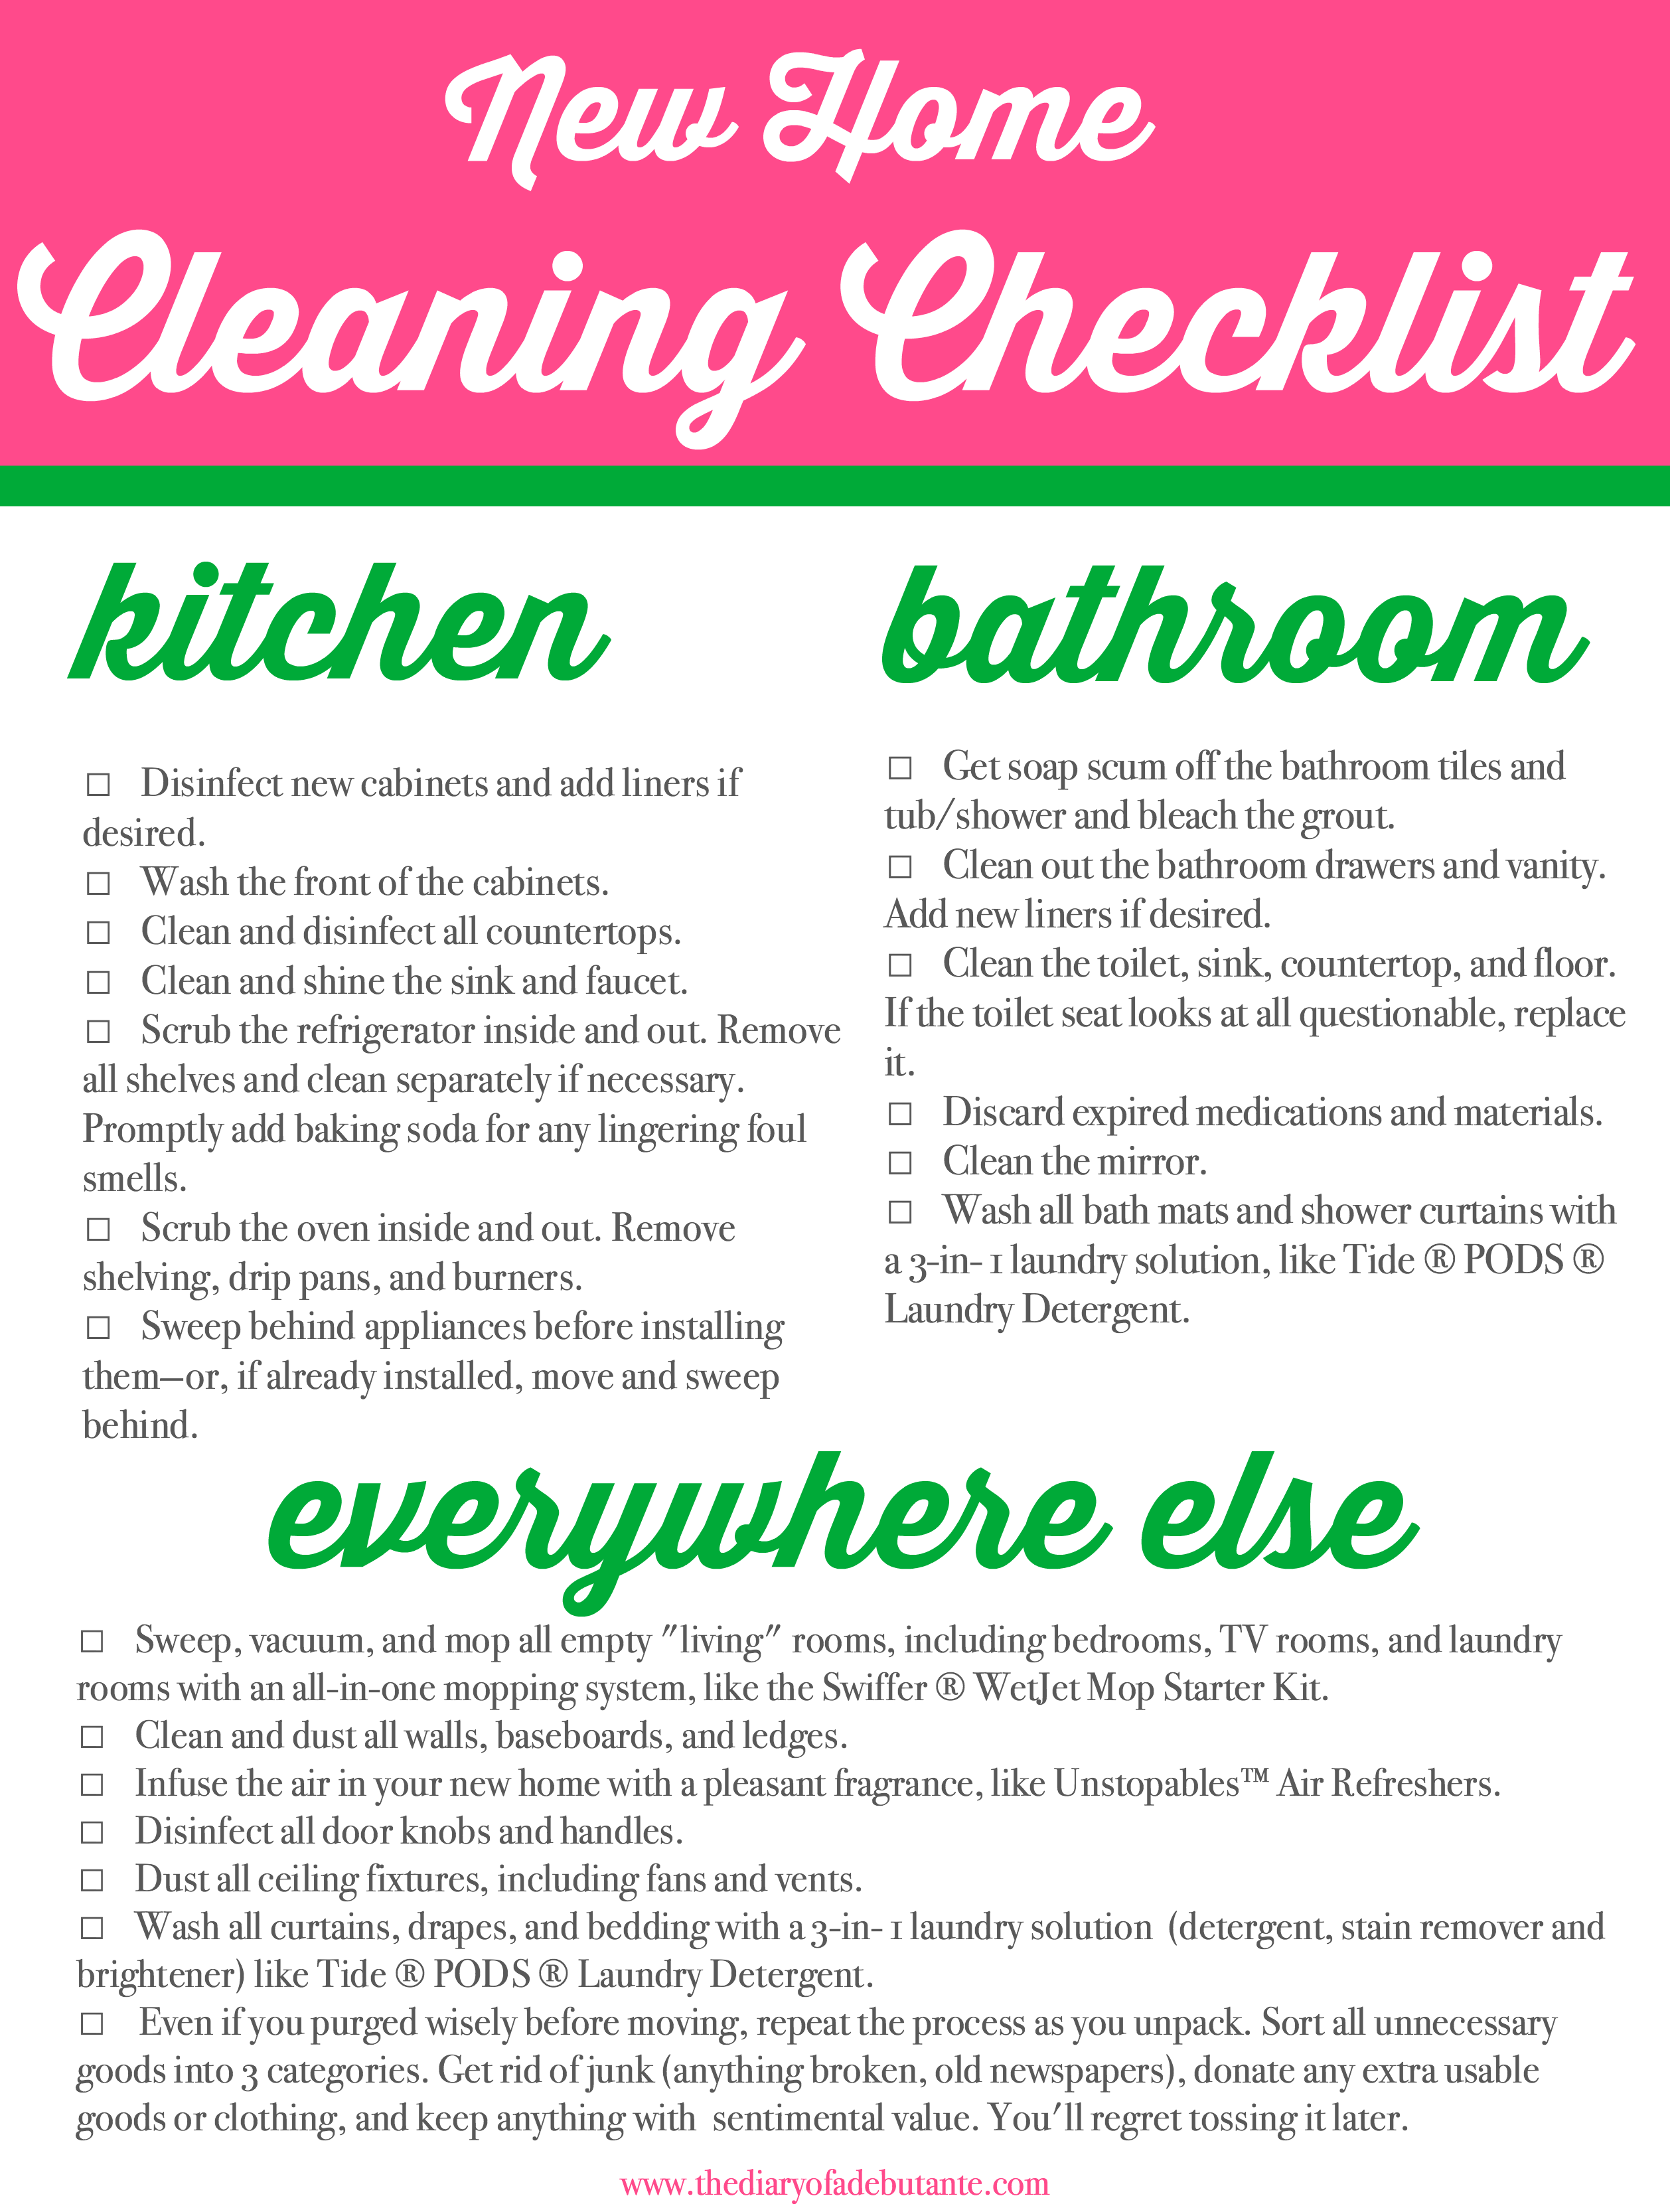 New Home Cleaning Checklist, Moving Cleaning Checklist, Clean Home Checklist, Cleaning Tips, Clean Hacks, Stephanie Ziajka, Diary of a Debutante